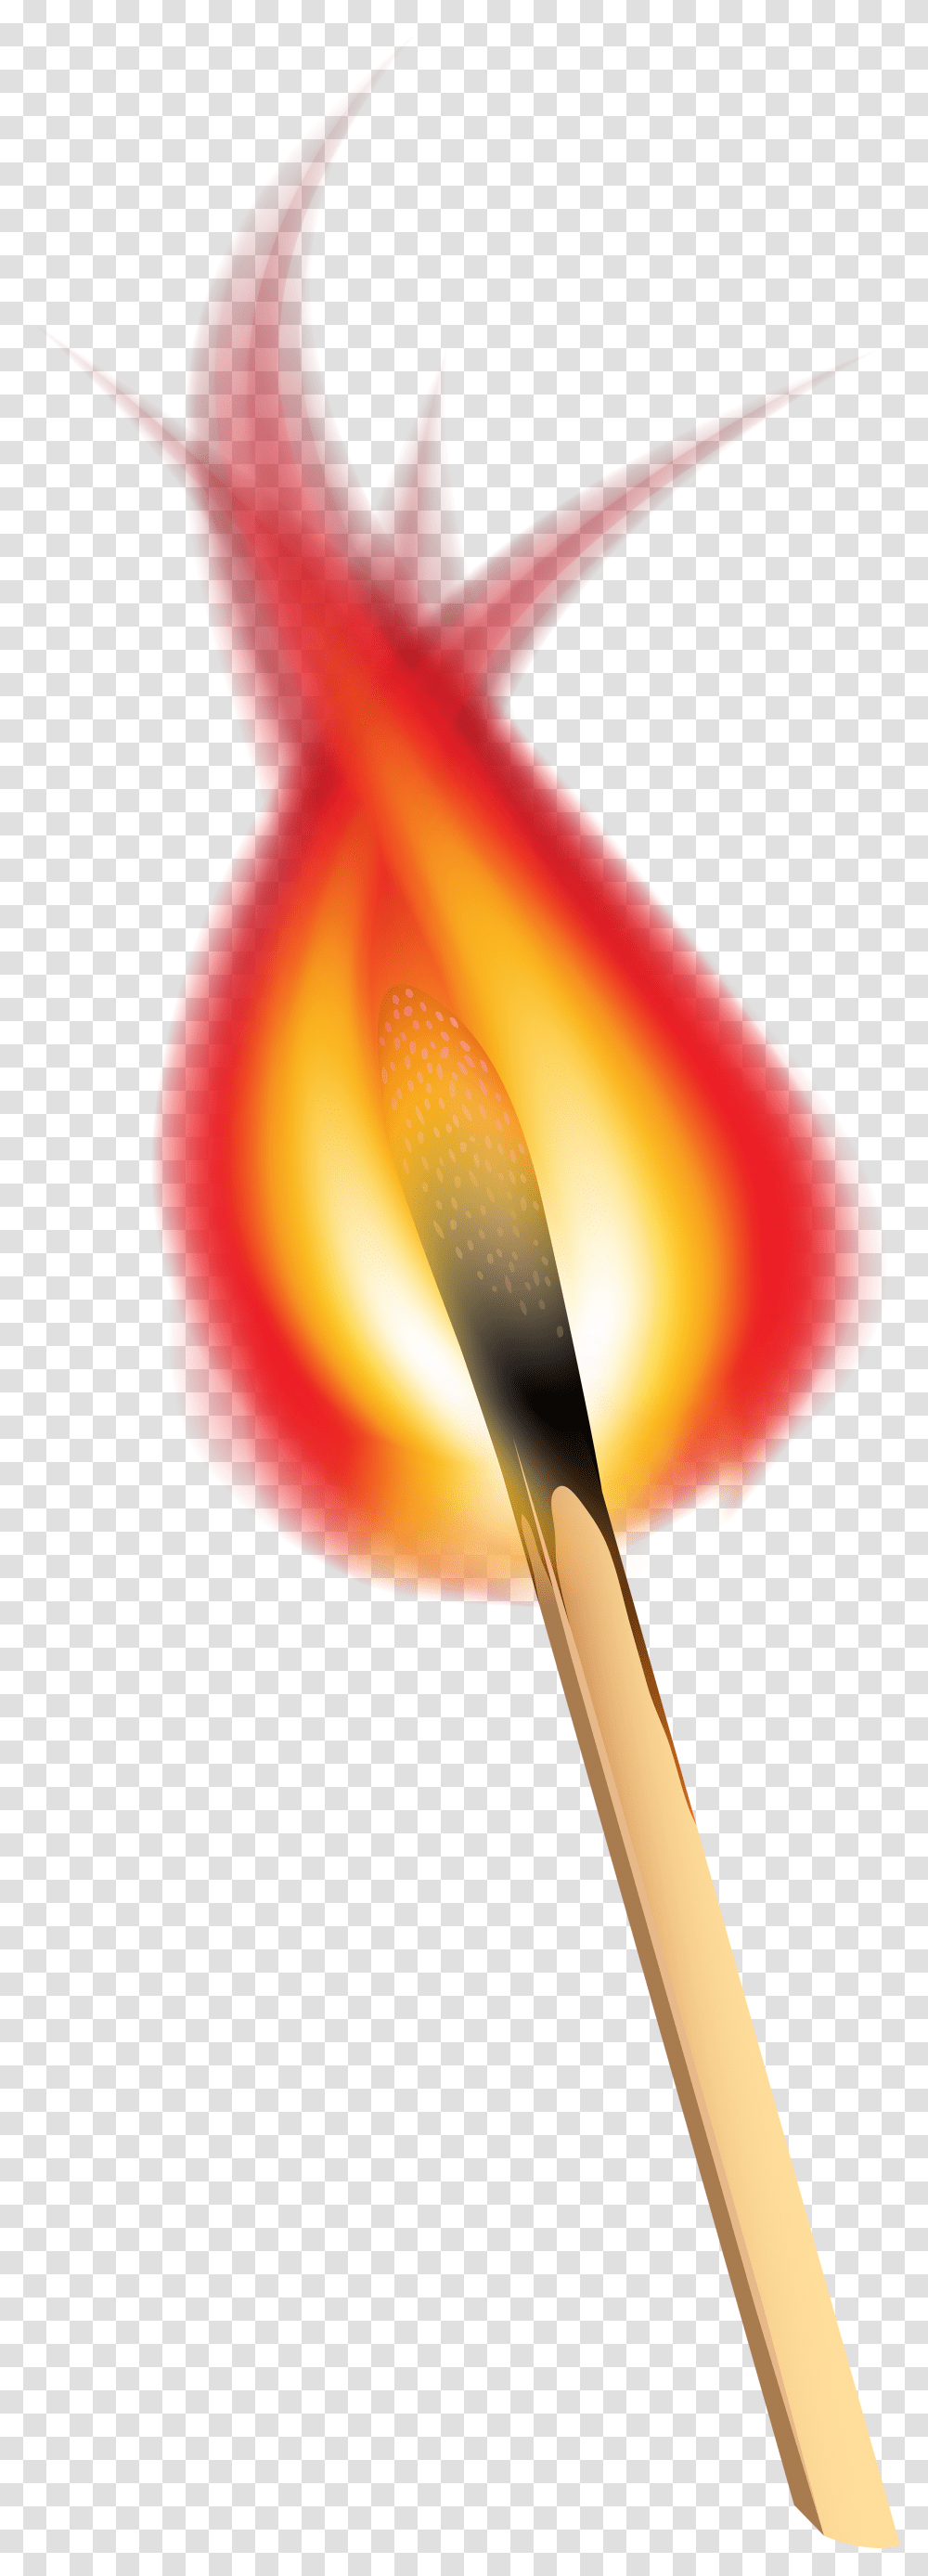 Match Fire Clipart Match On Fire, Flame, Flower, Plant, Blossom Transparent Png